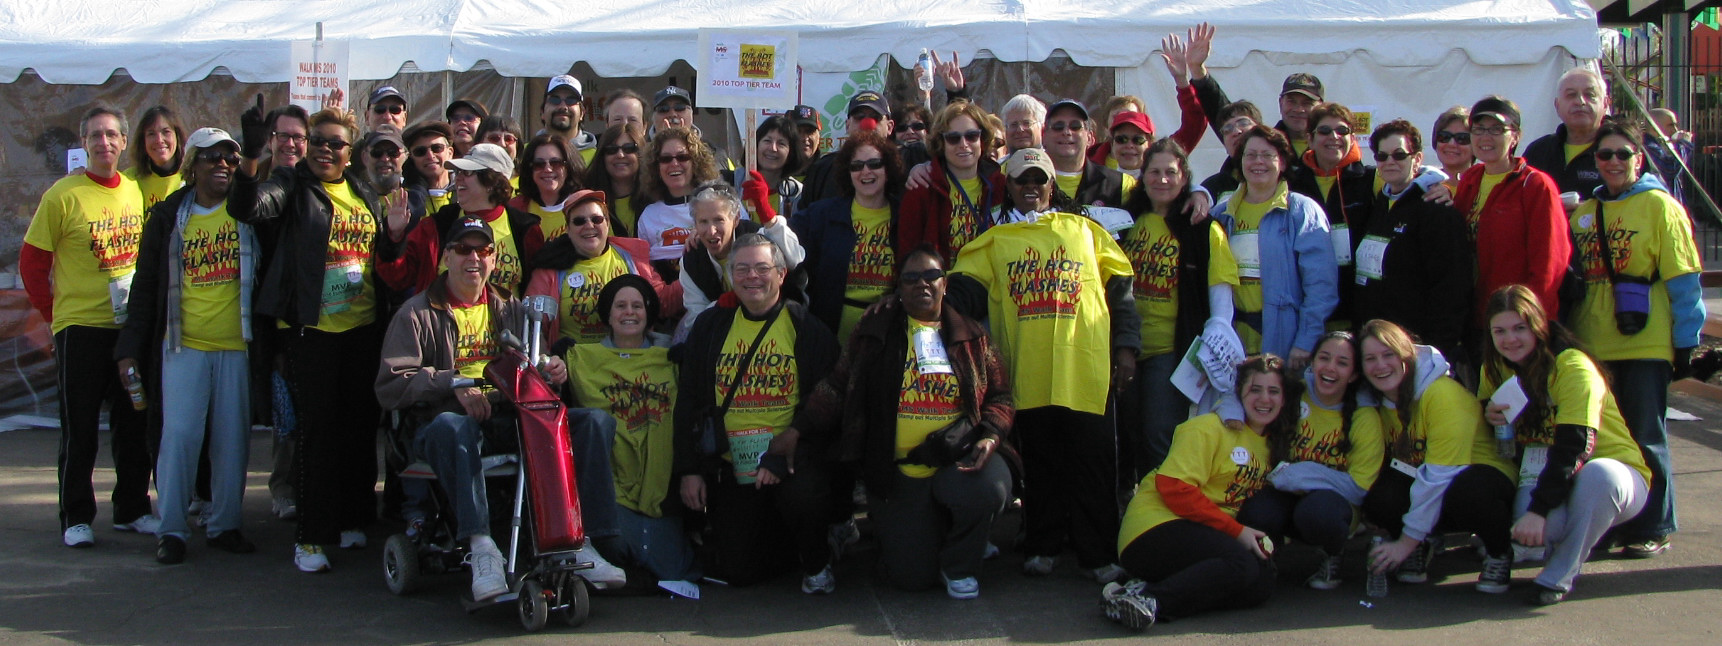 Picture of the Hot Flashes team at Rye Playland in 2010